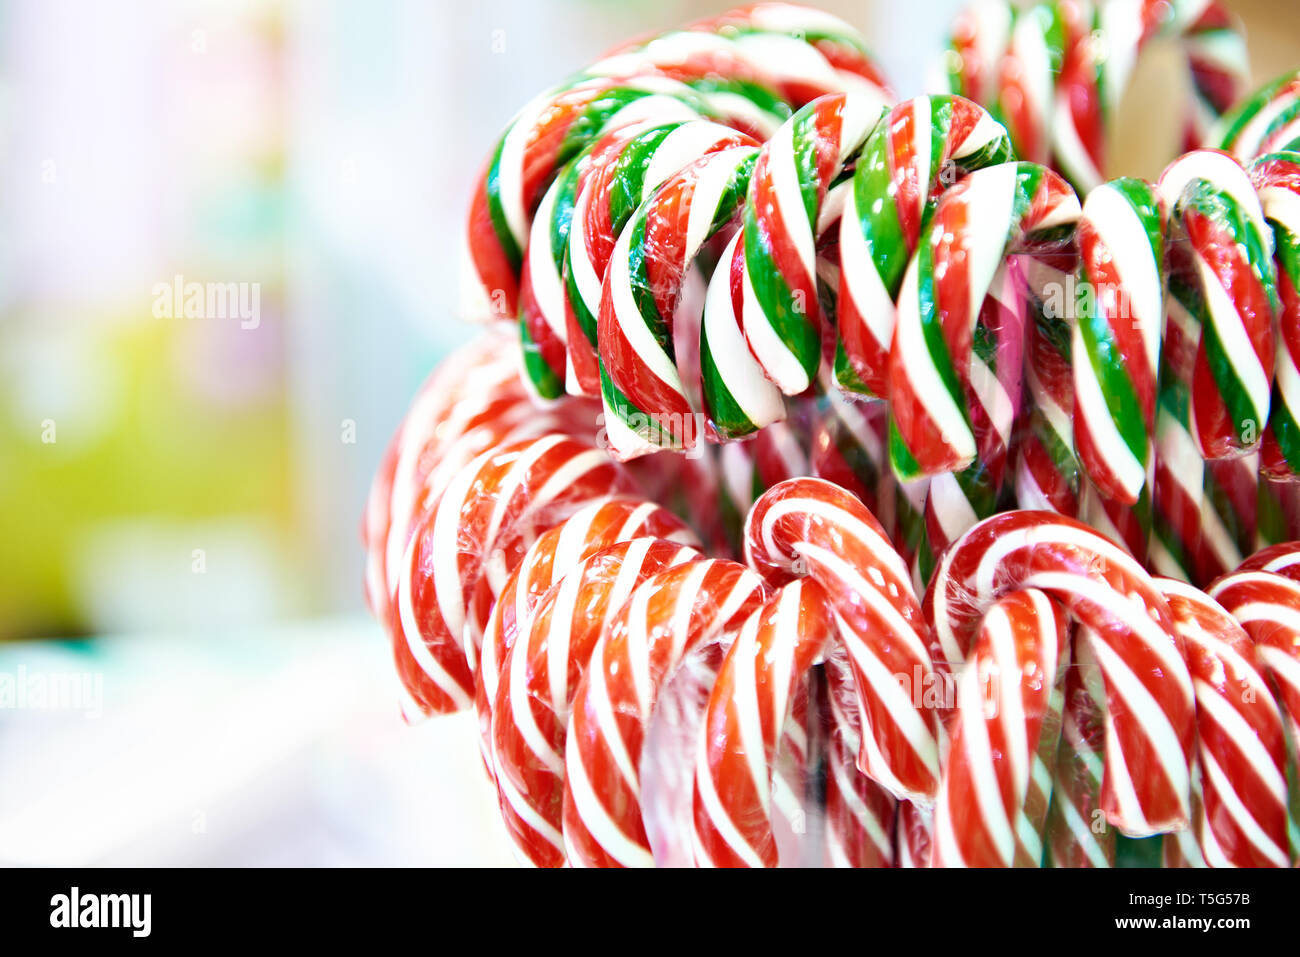 Christmas candy canes in store Stock Photo